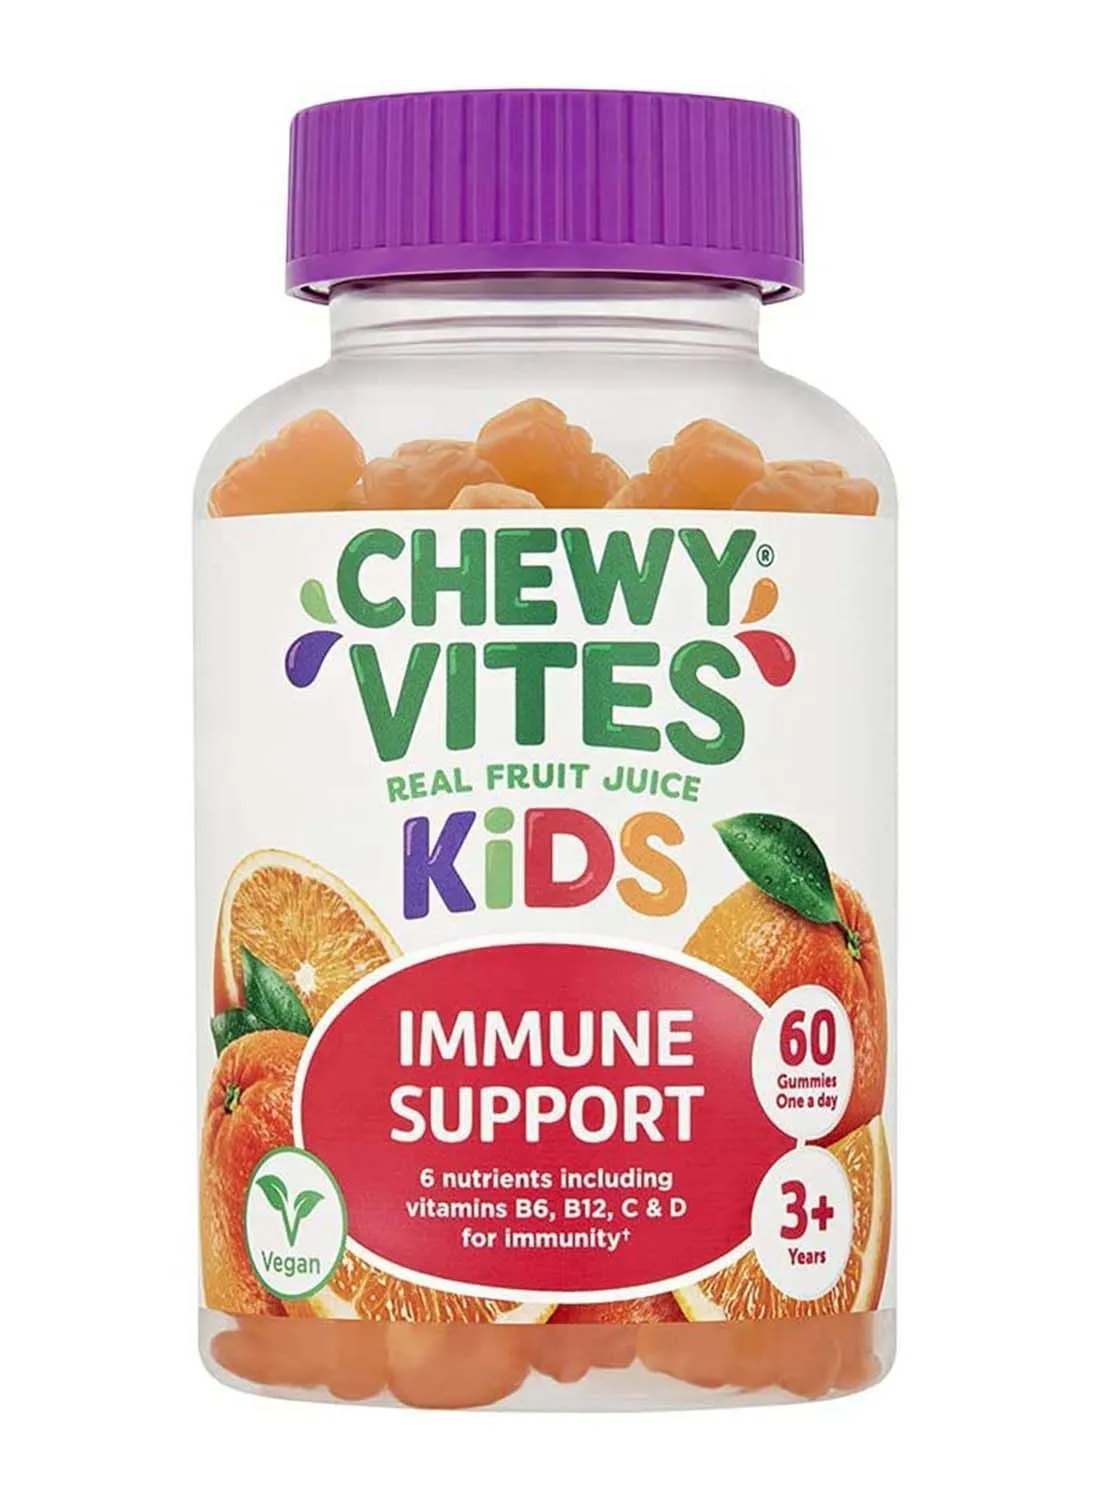 CHEWY VITES Chewy Vites Kids Immune Support 60's